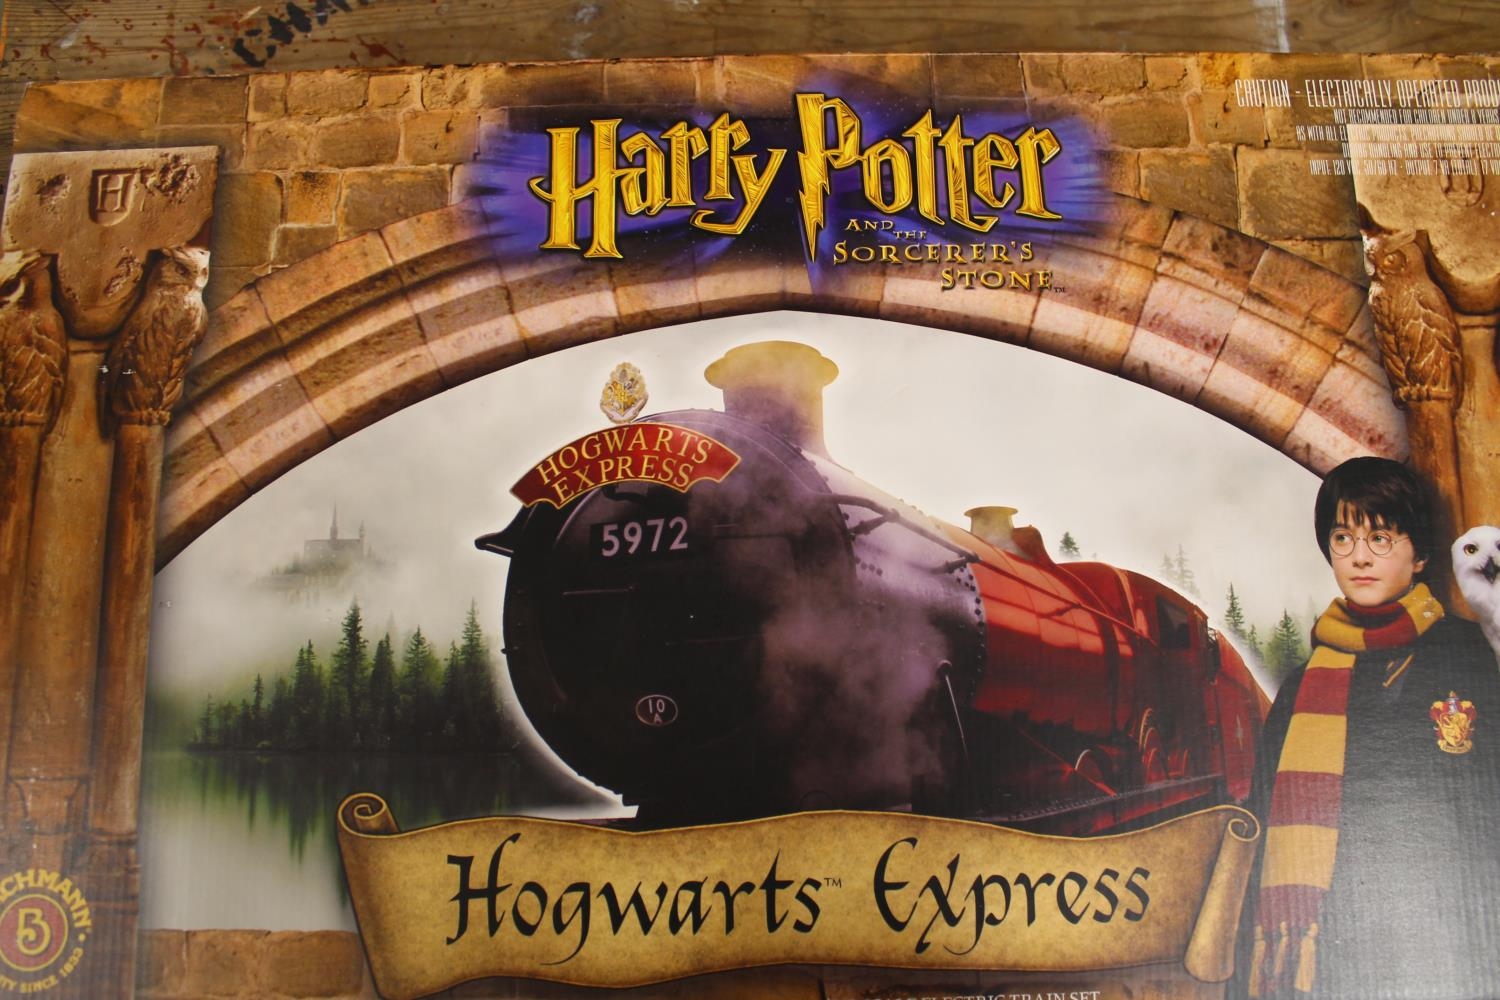 Bachmann O gauge model railway 00639 Harry Potter and the Sorcerer's Stone Hogwarts Express electric - Image 5 of 5